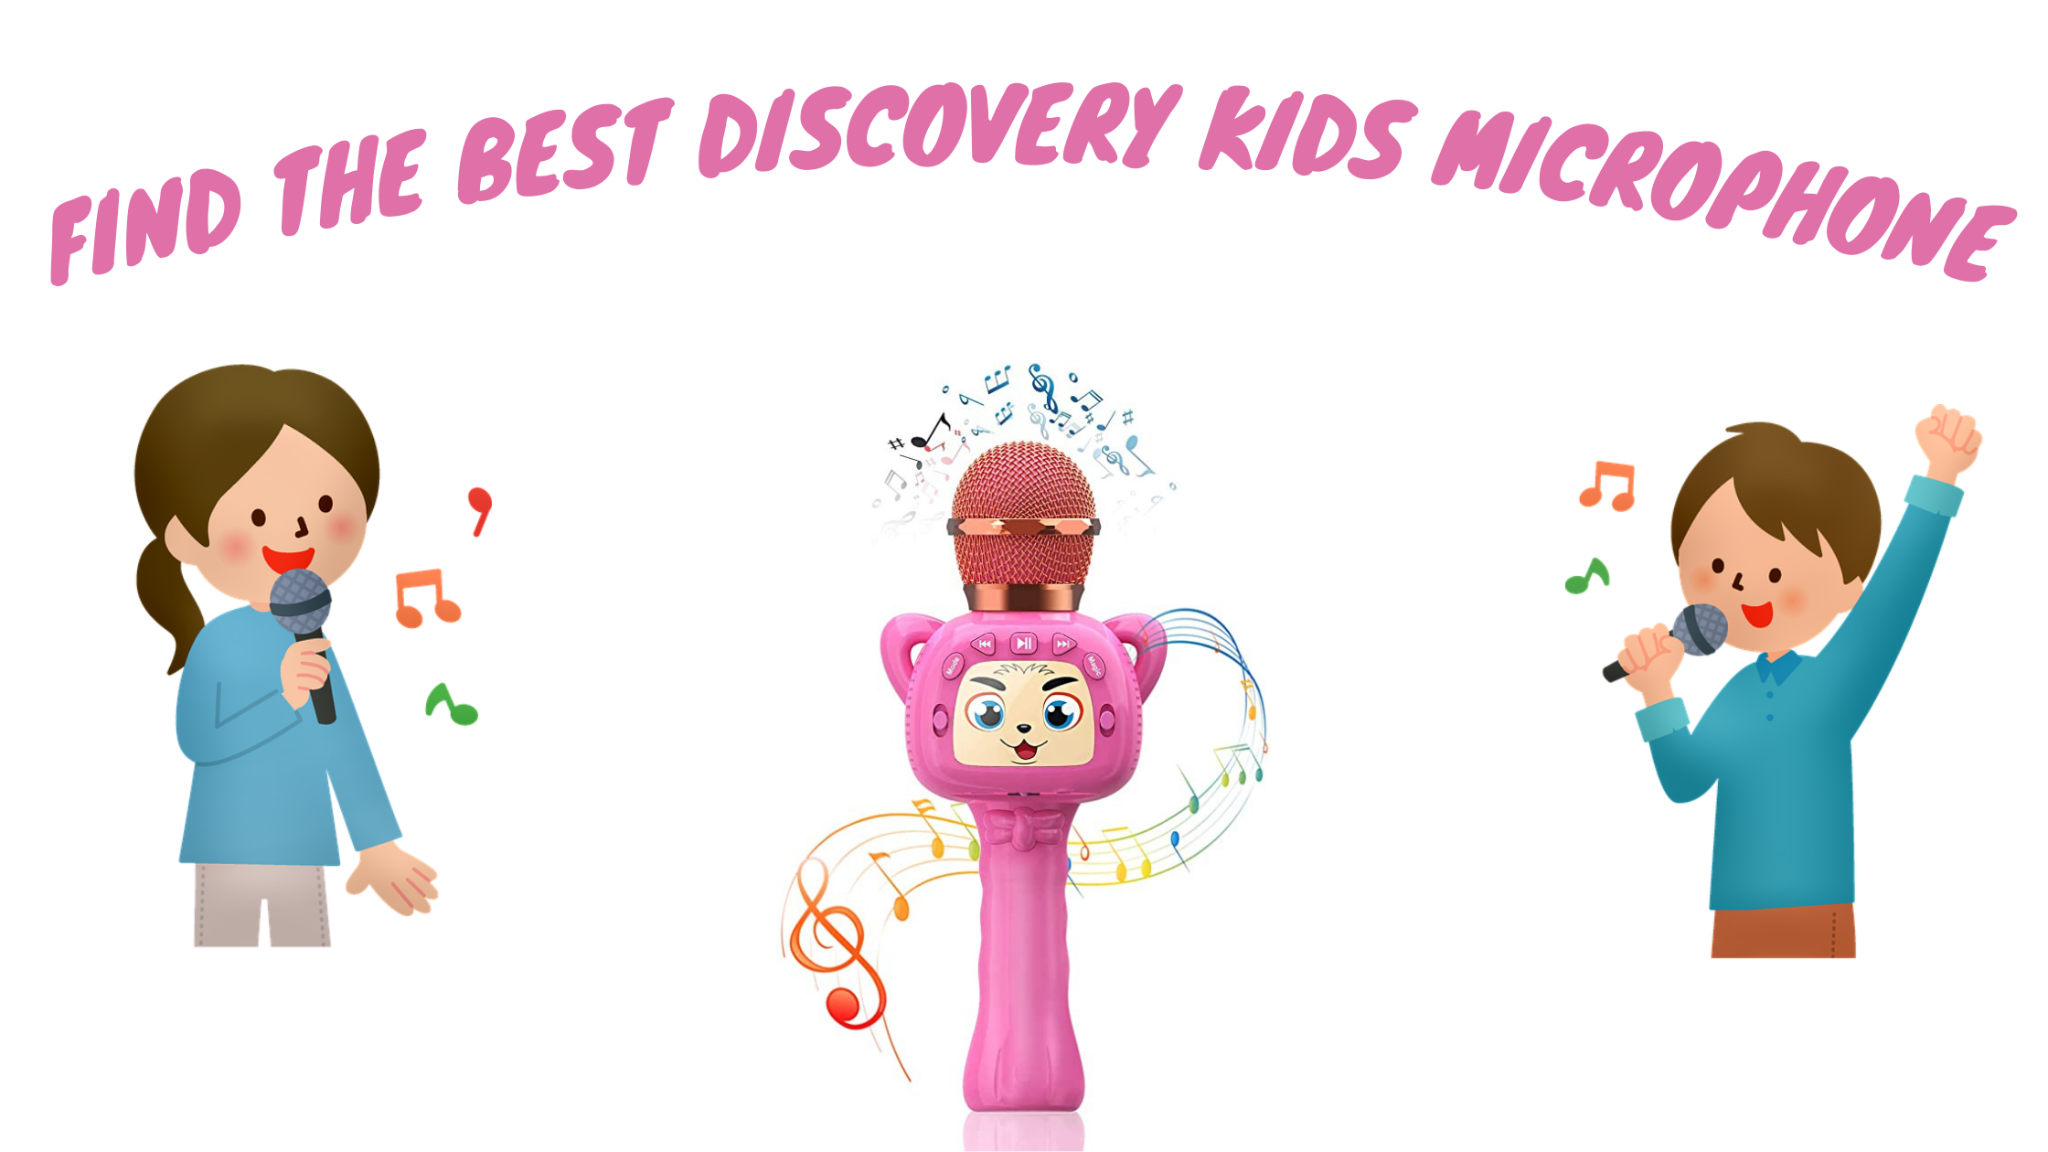 Discovery kindermicrofoon